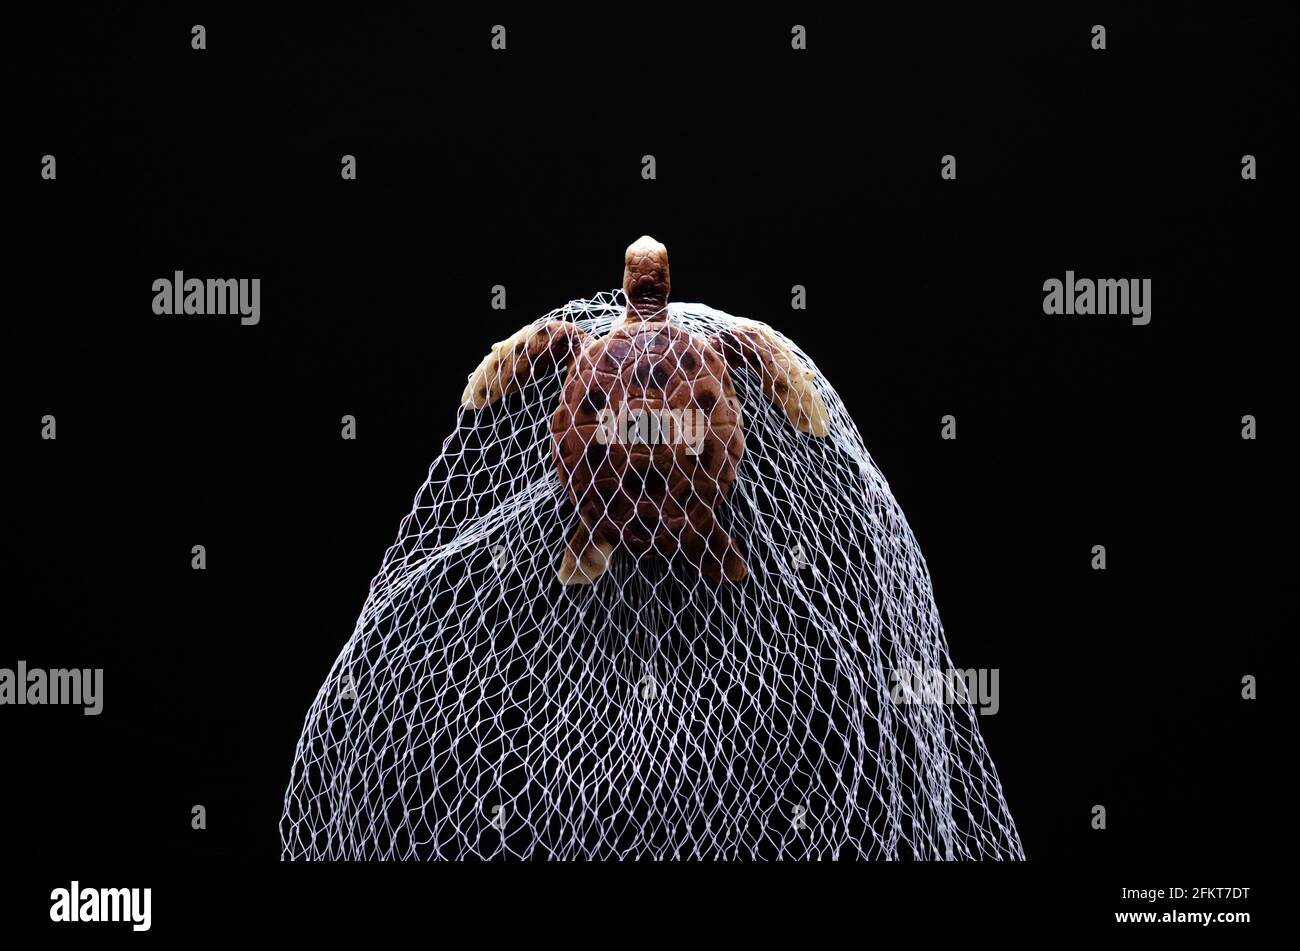 A turtle toy model trapped in white net on black background. Minimal world ocean day concept. Stock Photo